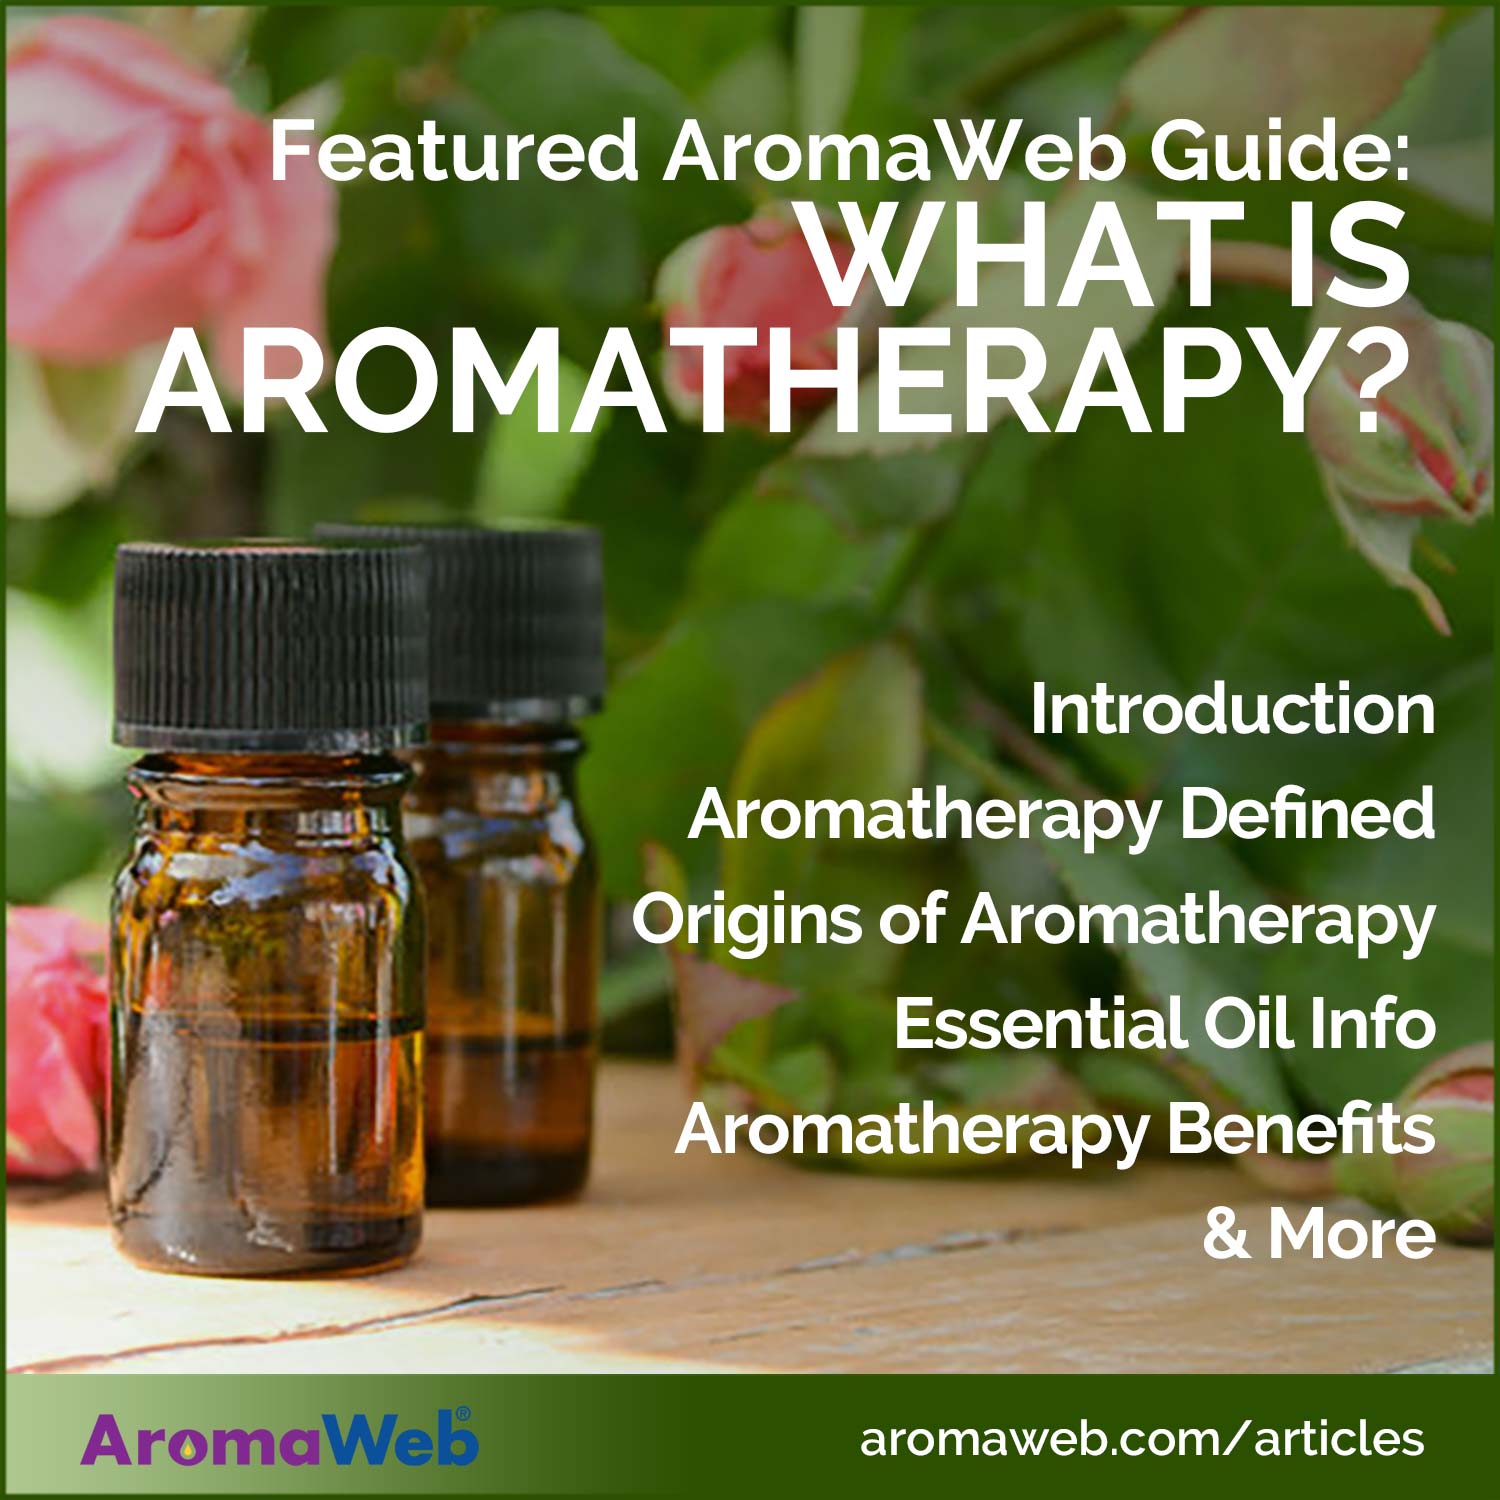 What is Aromatherapy?